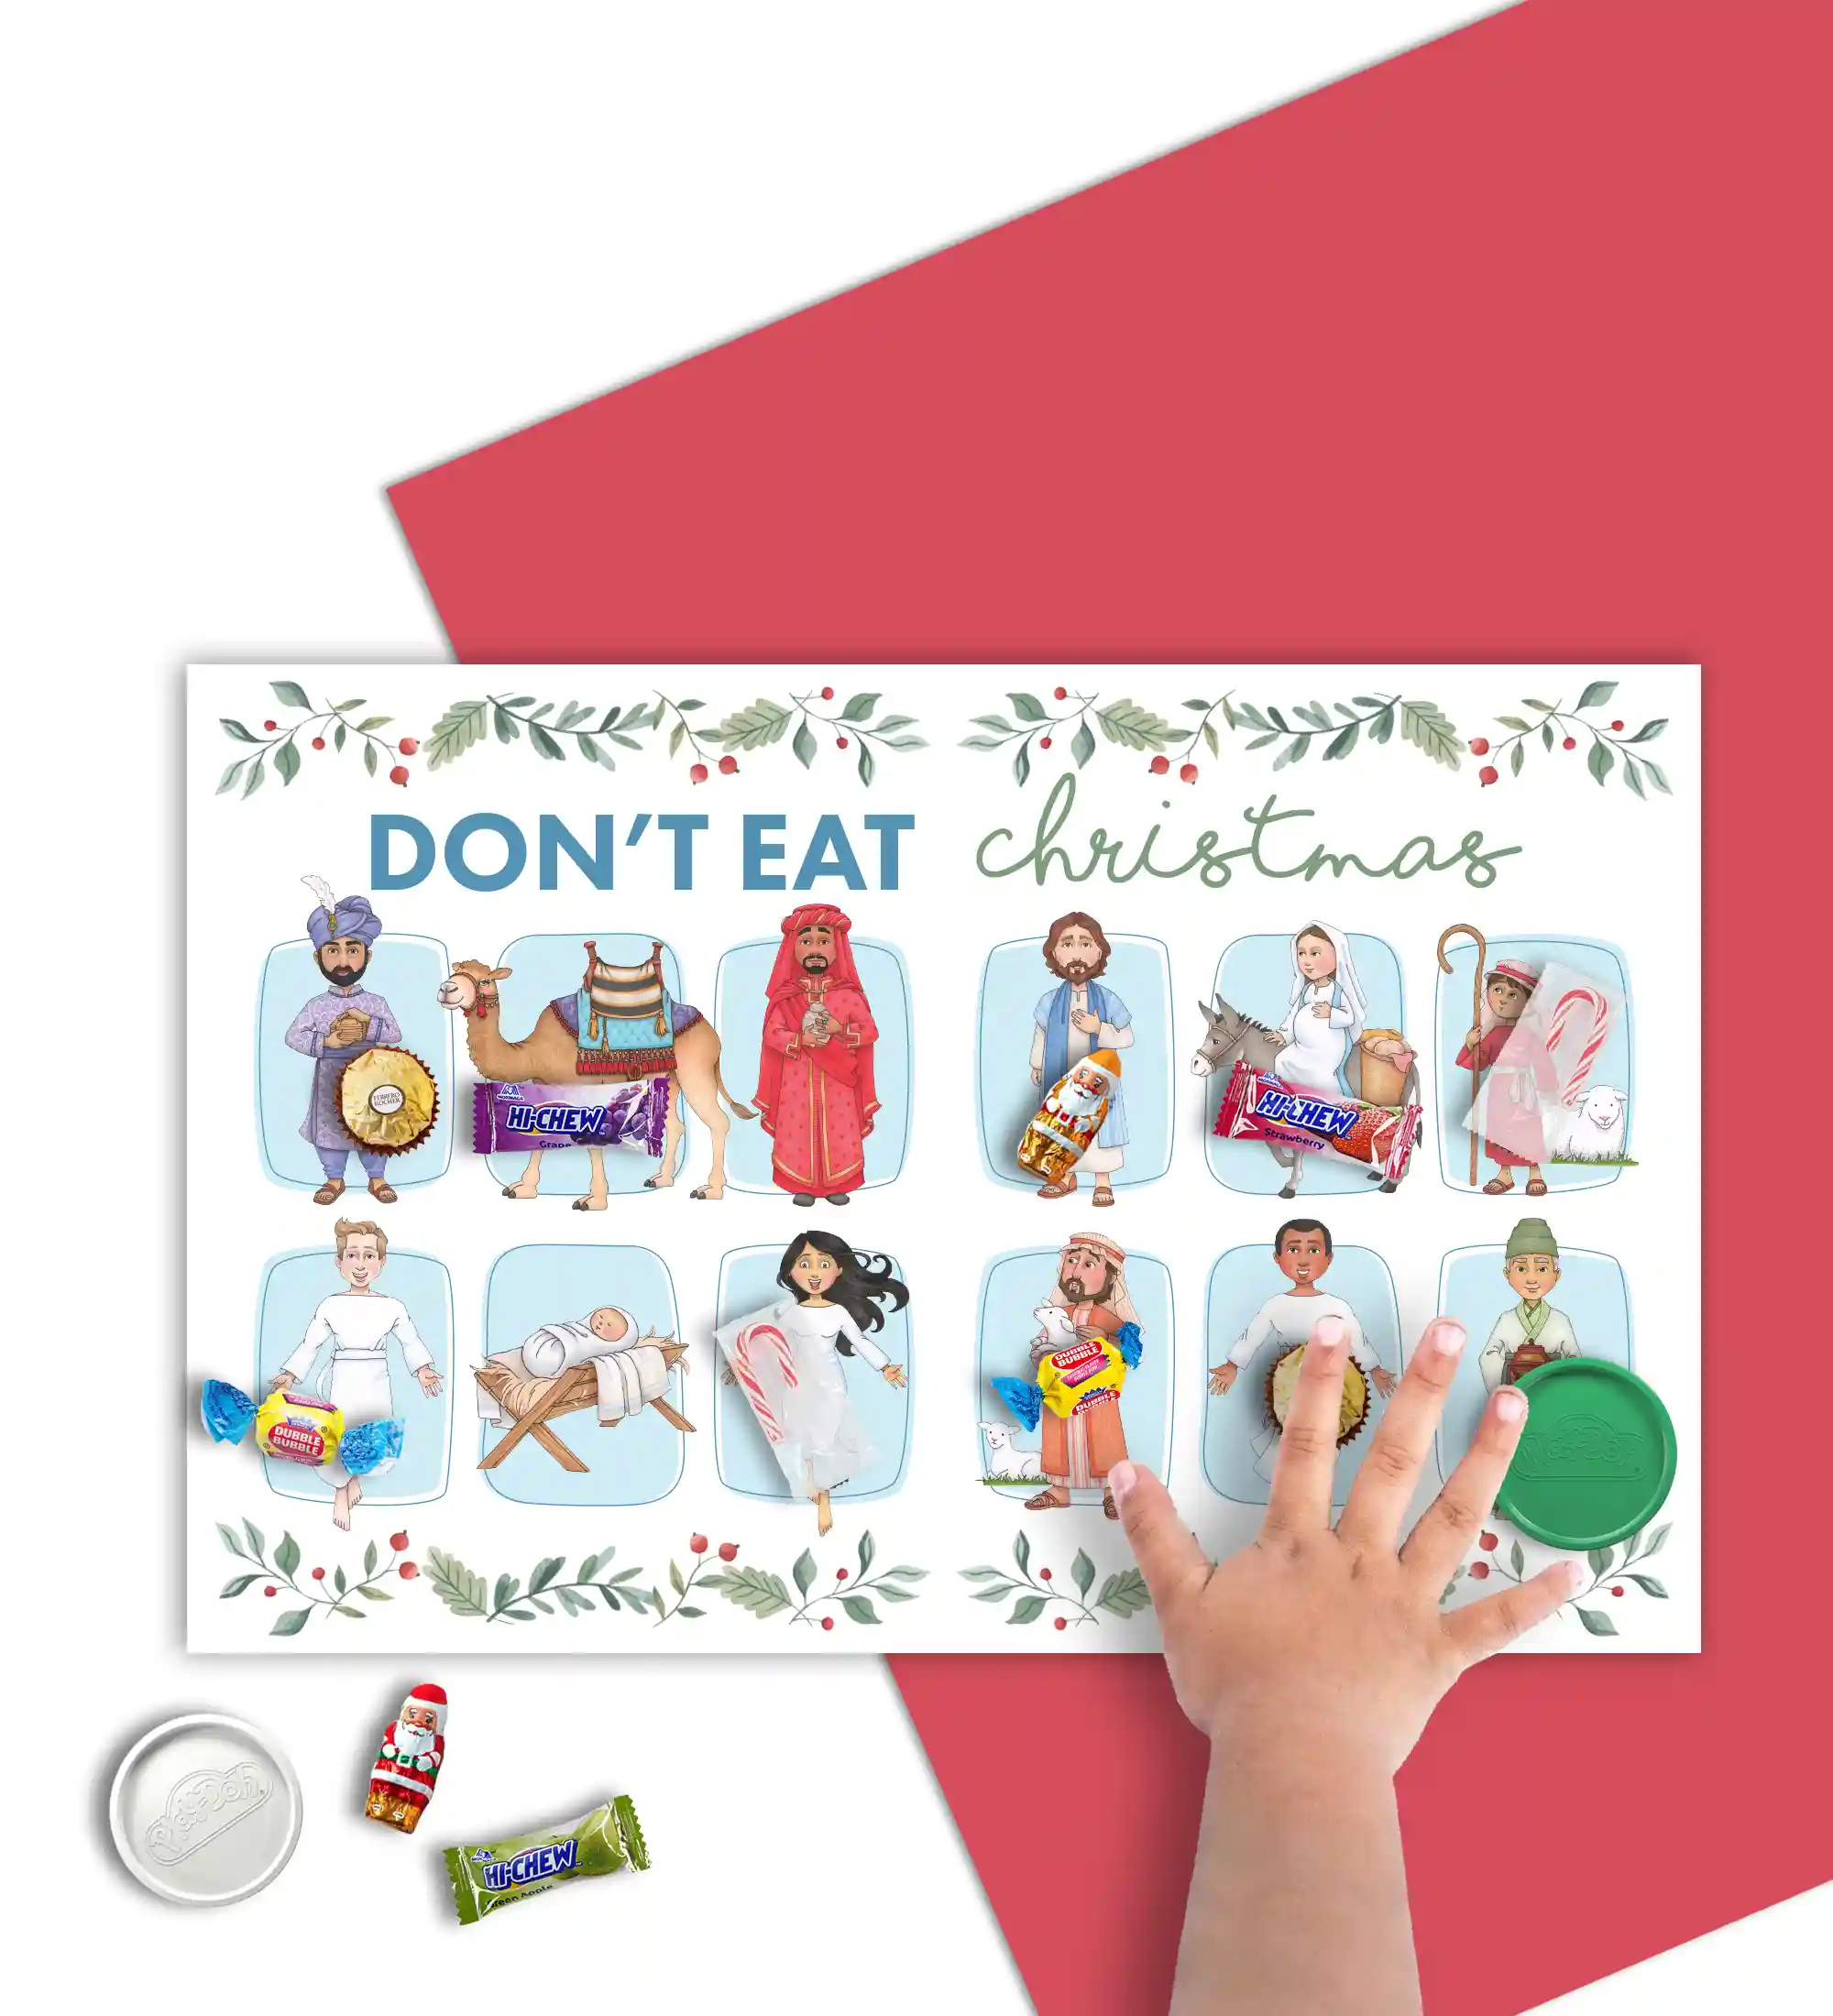 Don't Eat Pete Christmas game but a Nativity version. Play a fun game with the kids this Christmas season by downloading our Don't Eat Christmas game. Instructions included with the Christmas game download.